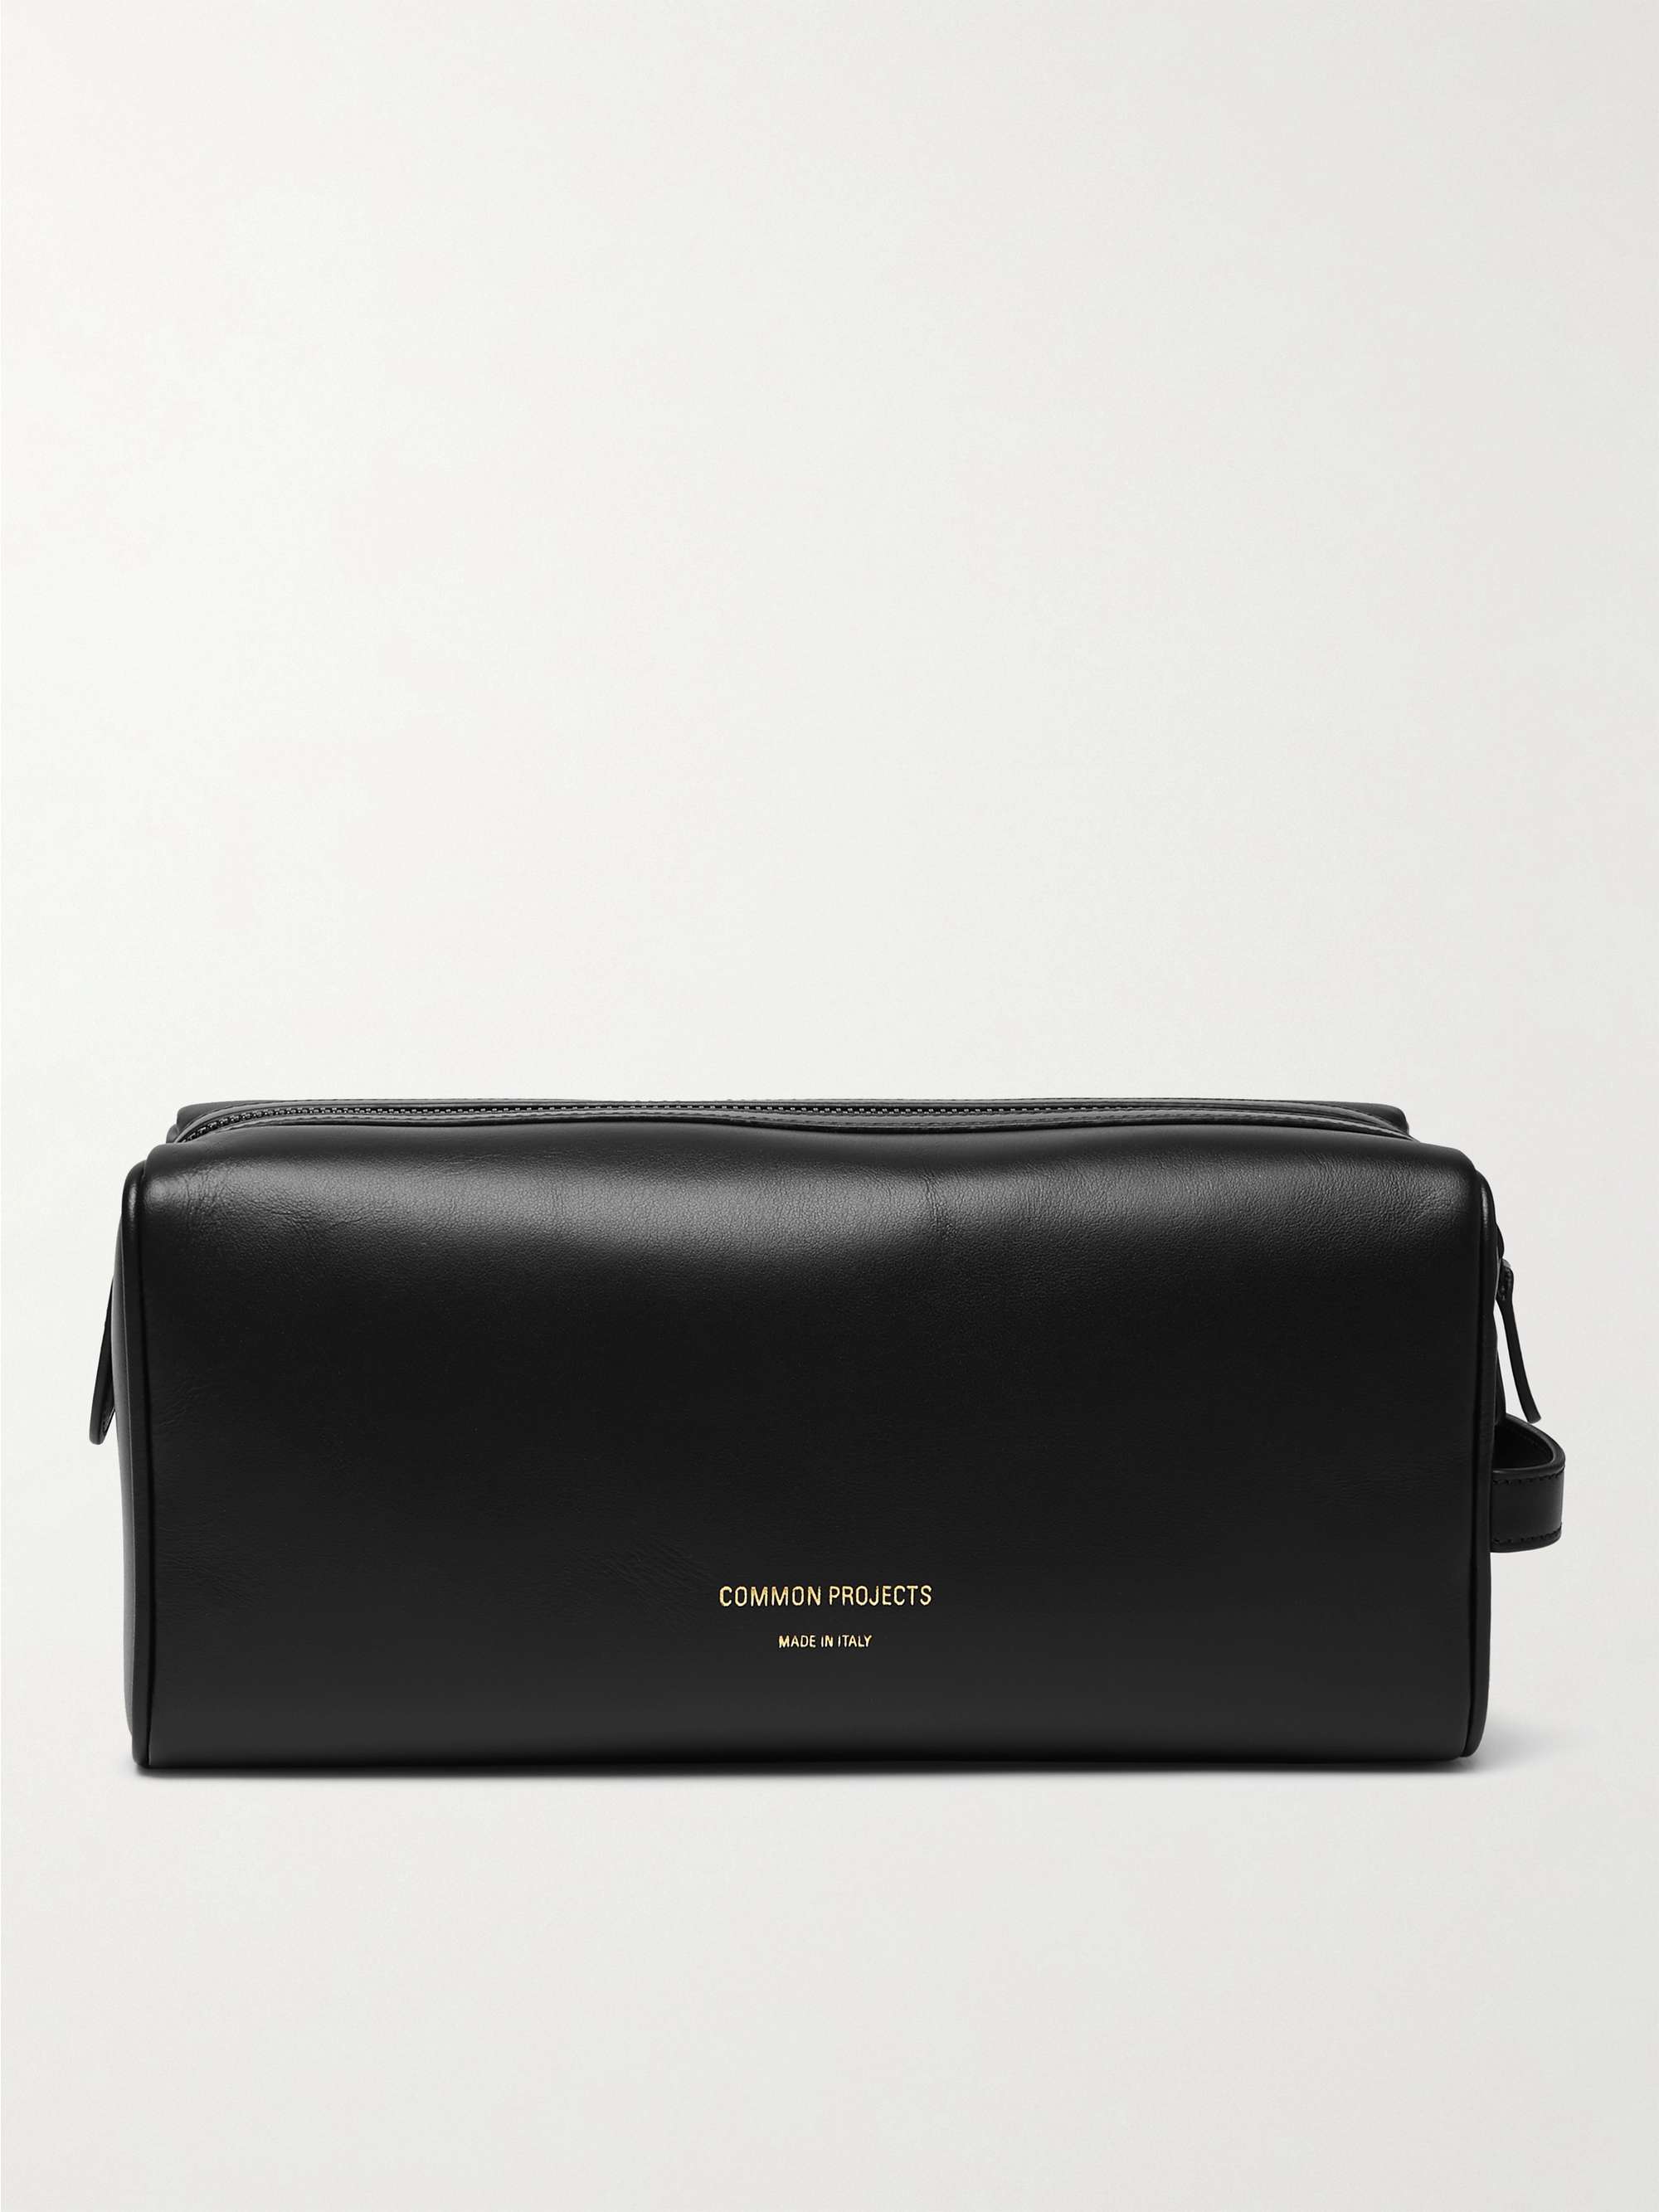 COMMON PROJECTS Leather Wash Bag